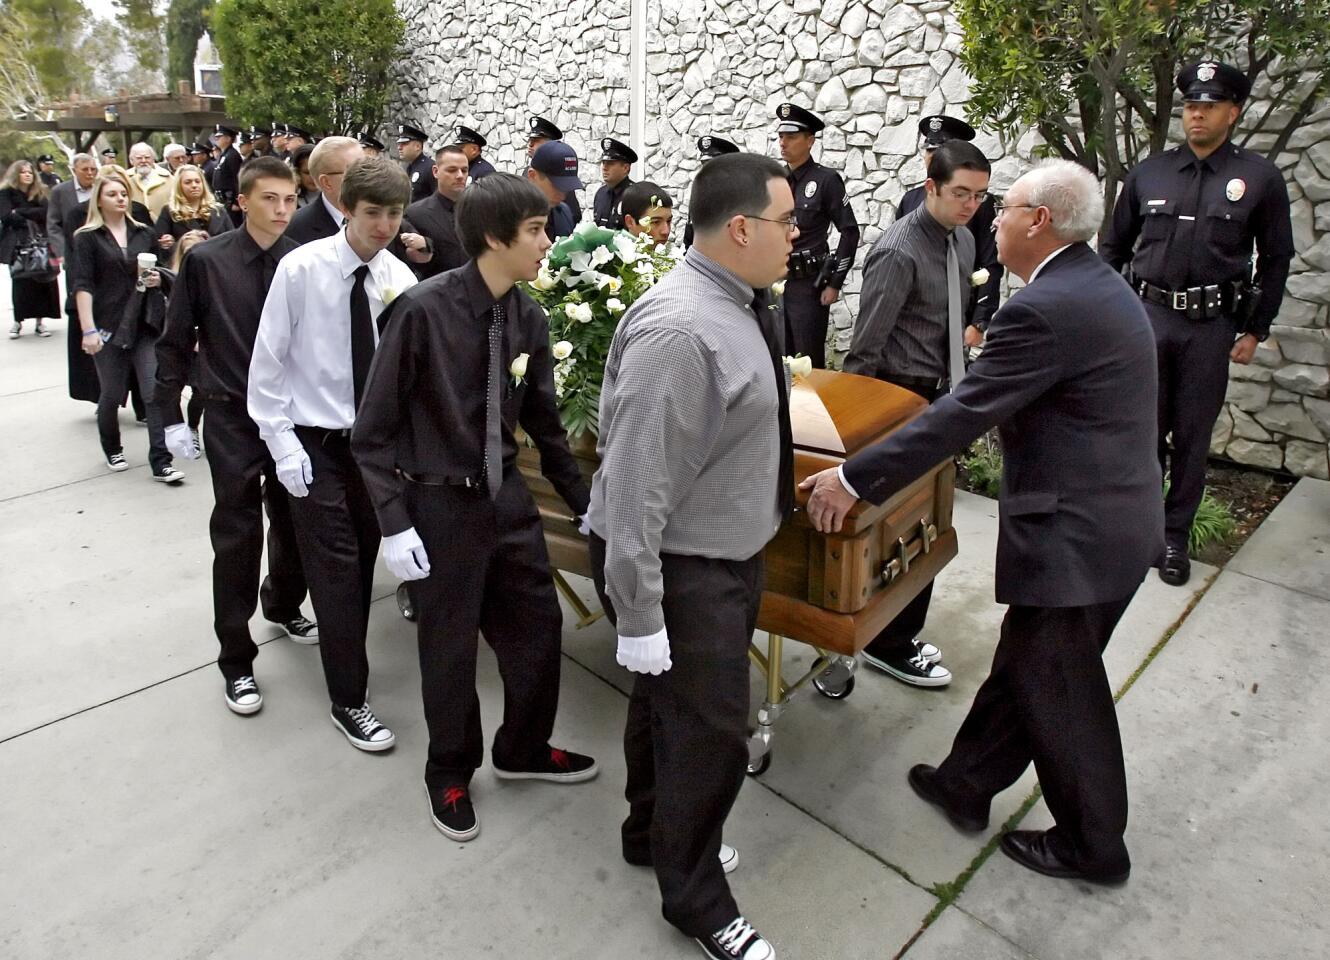 The body of 15-yr. old Drew Ferraro is brought in to Our Lady of Lourdes Church for funeral services in Tujunga on Wednesday, February 15, 2012. Ferraro jumped to his death from the roof of a Crescenta Valley High School building, where he was a sophomore, last Friday.